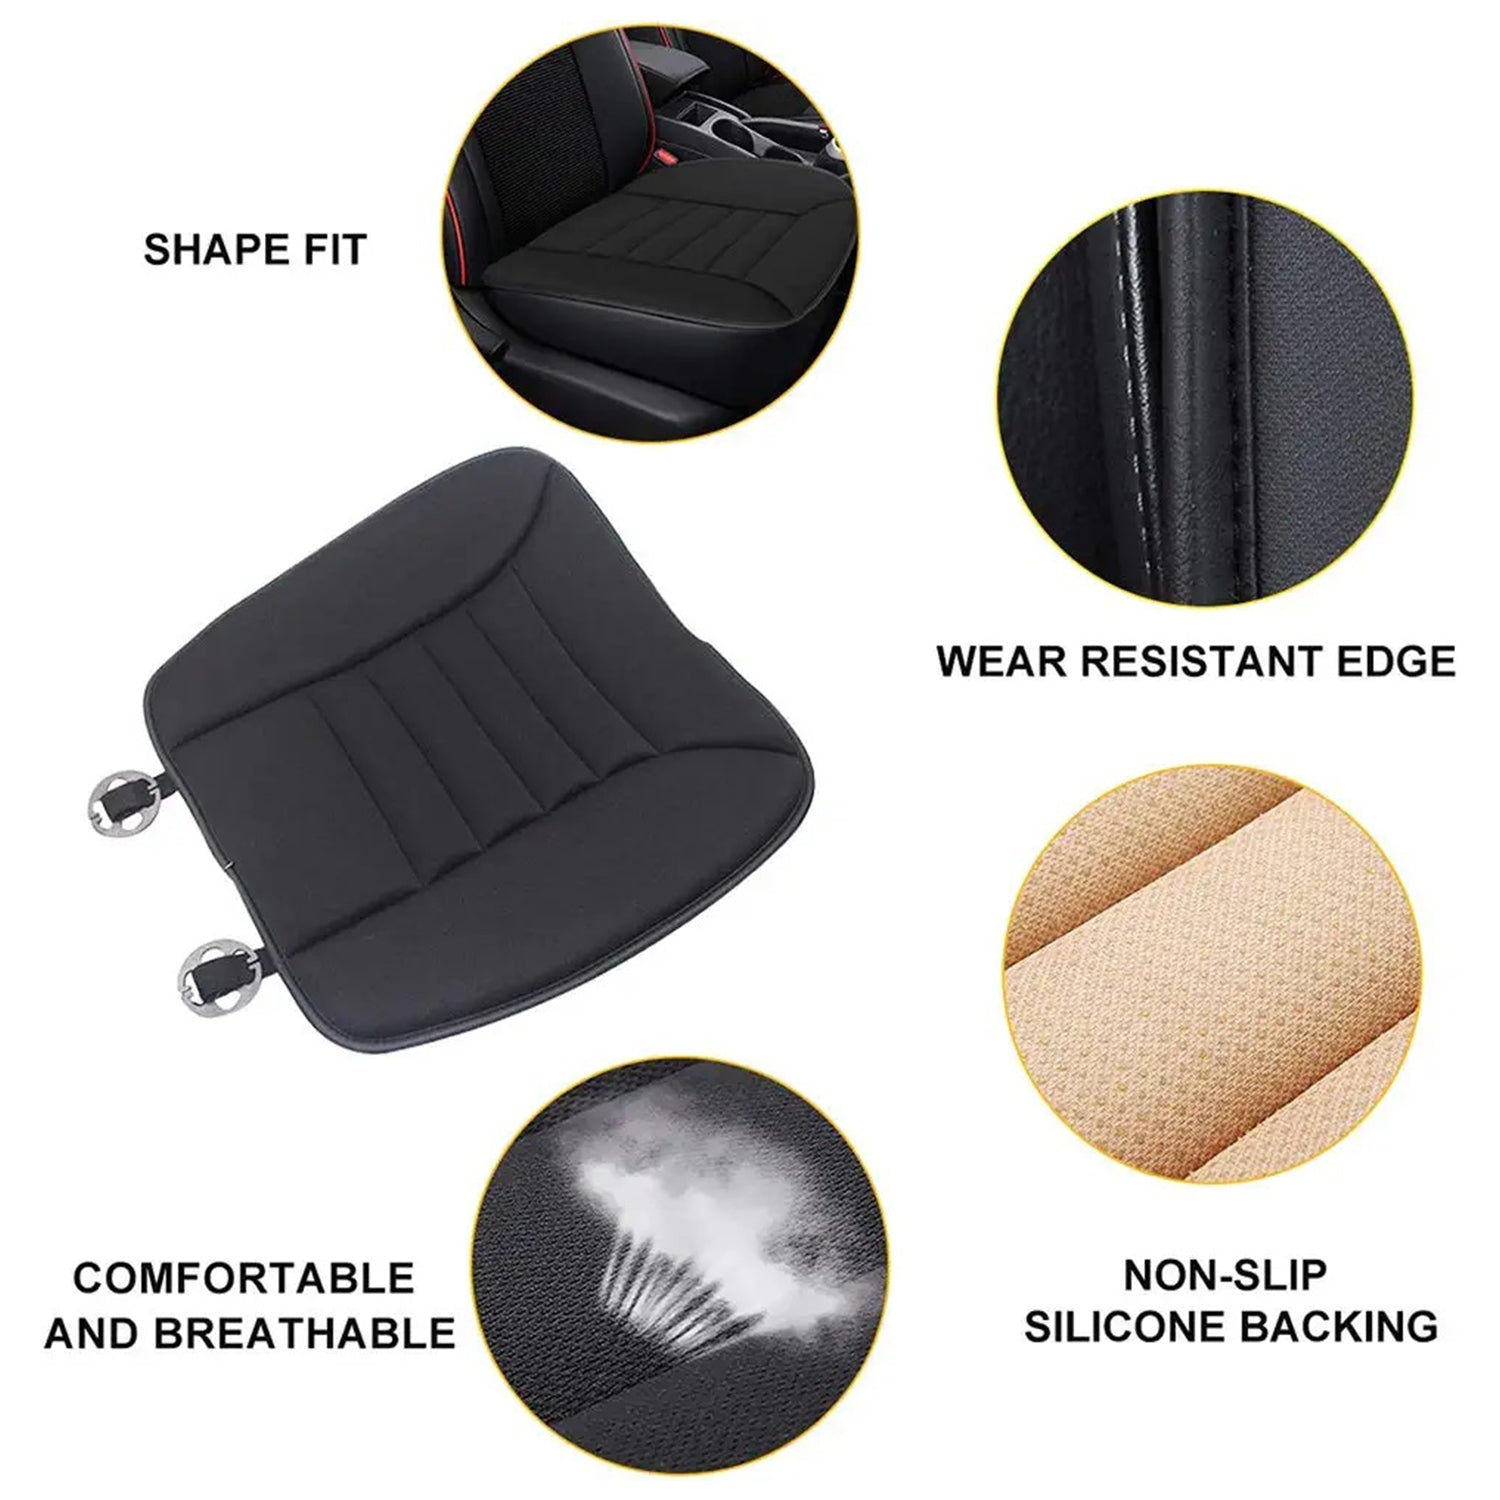 Car Seat Cushion with 1.2inch Comfort Memory Foam, Custom-Fit For Car, Seat Cushion for Car and Office Chair DLMB247